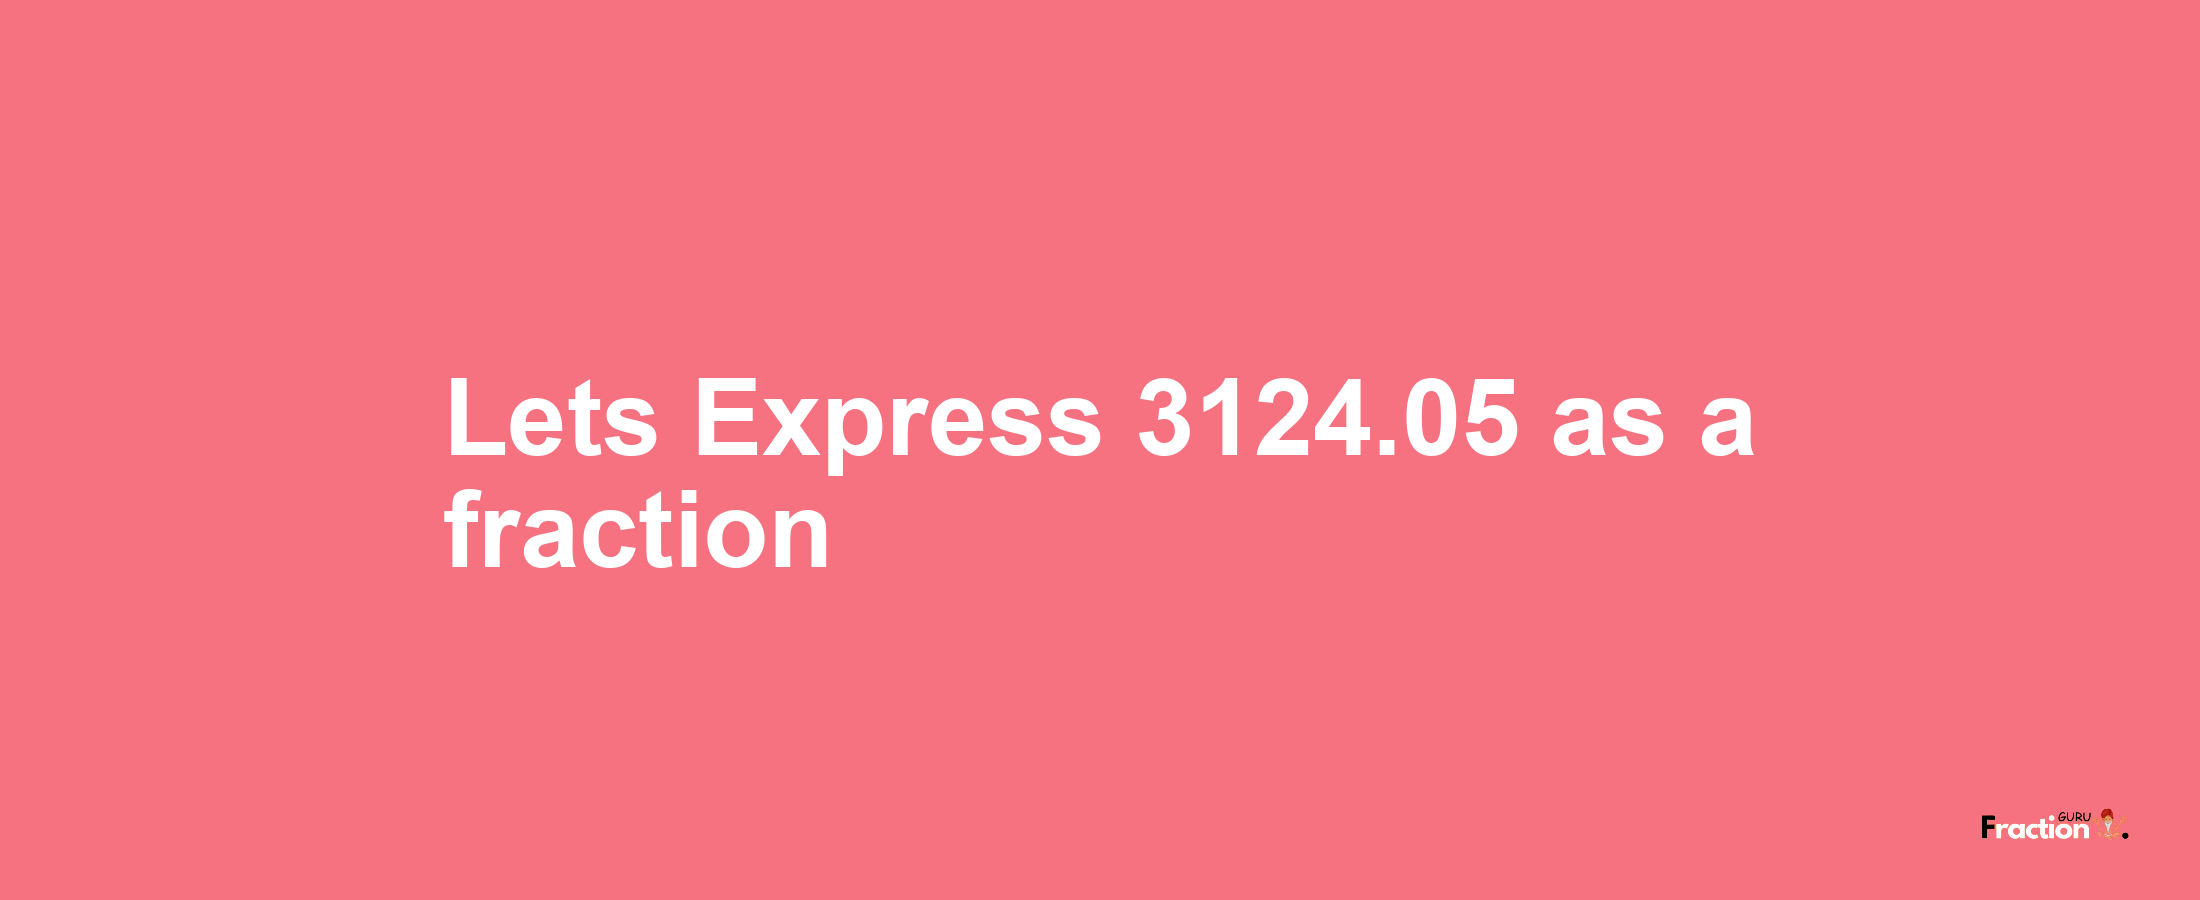 Lets Express 3124.05 as afraction